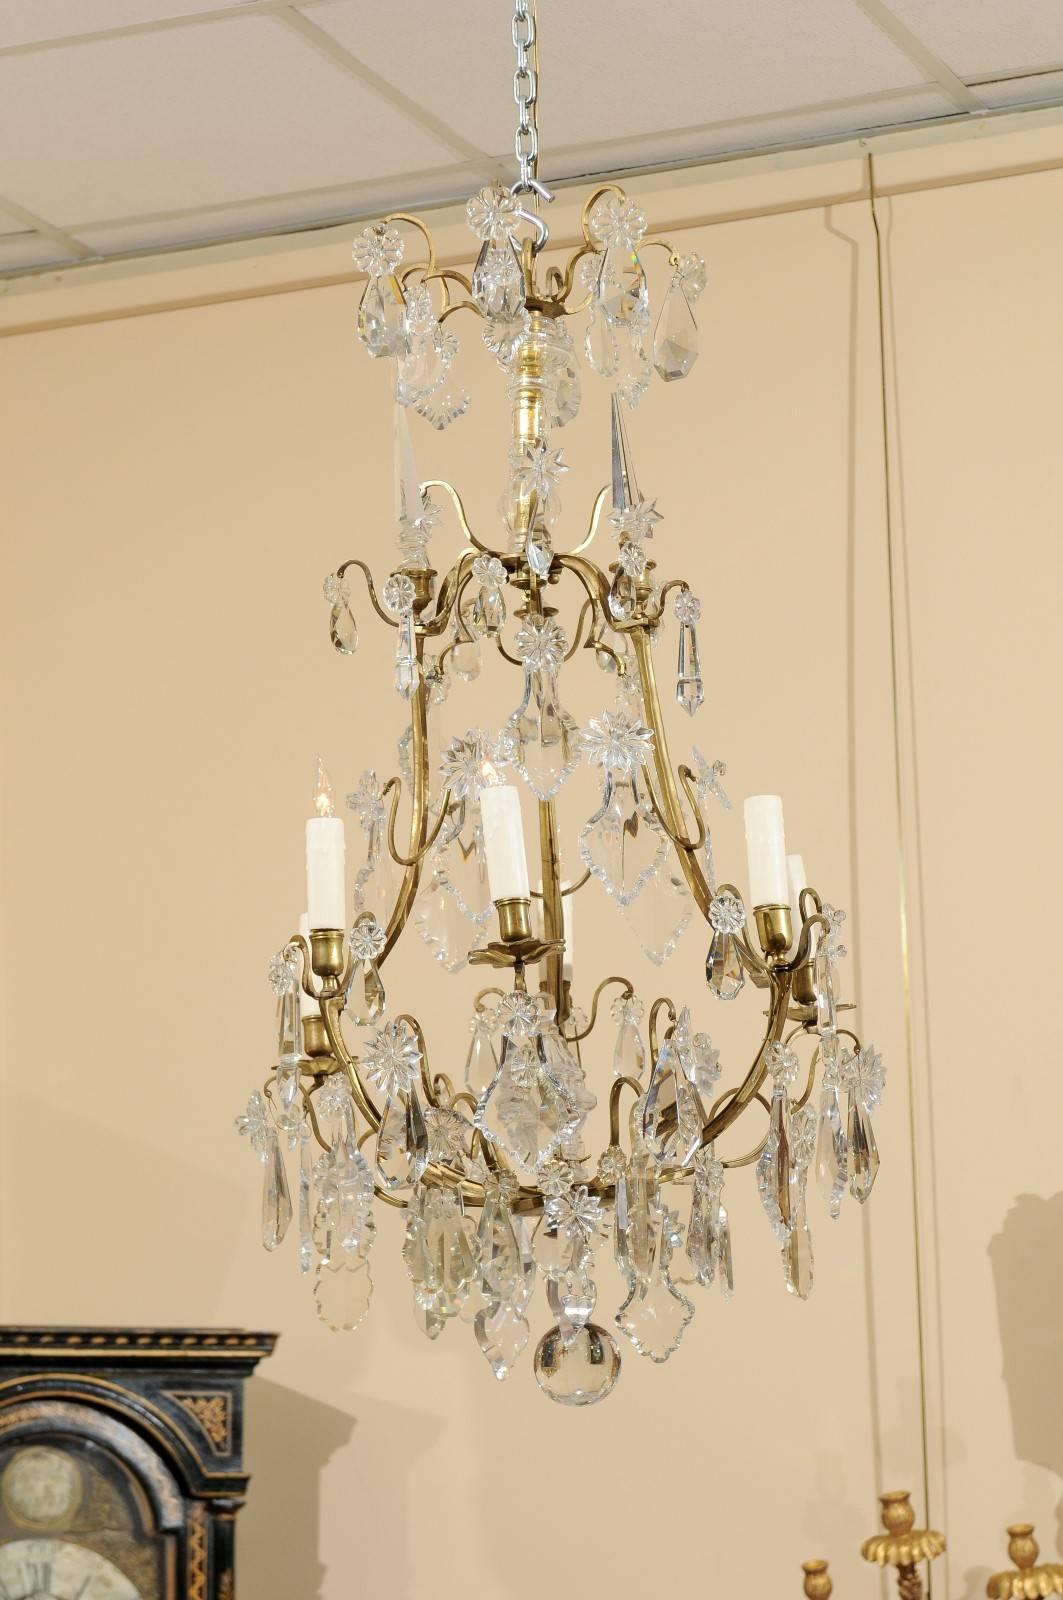 Late 19th century French Louis XV style chandelier with bronze frame and cut crystal pendants.